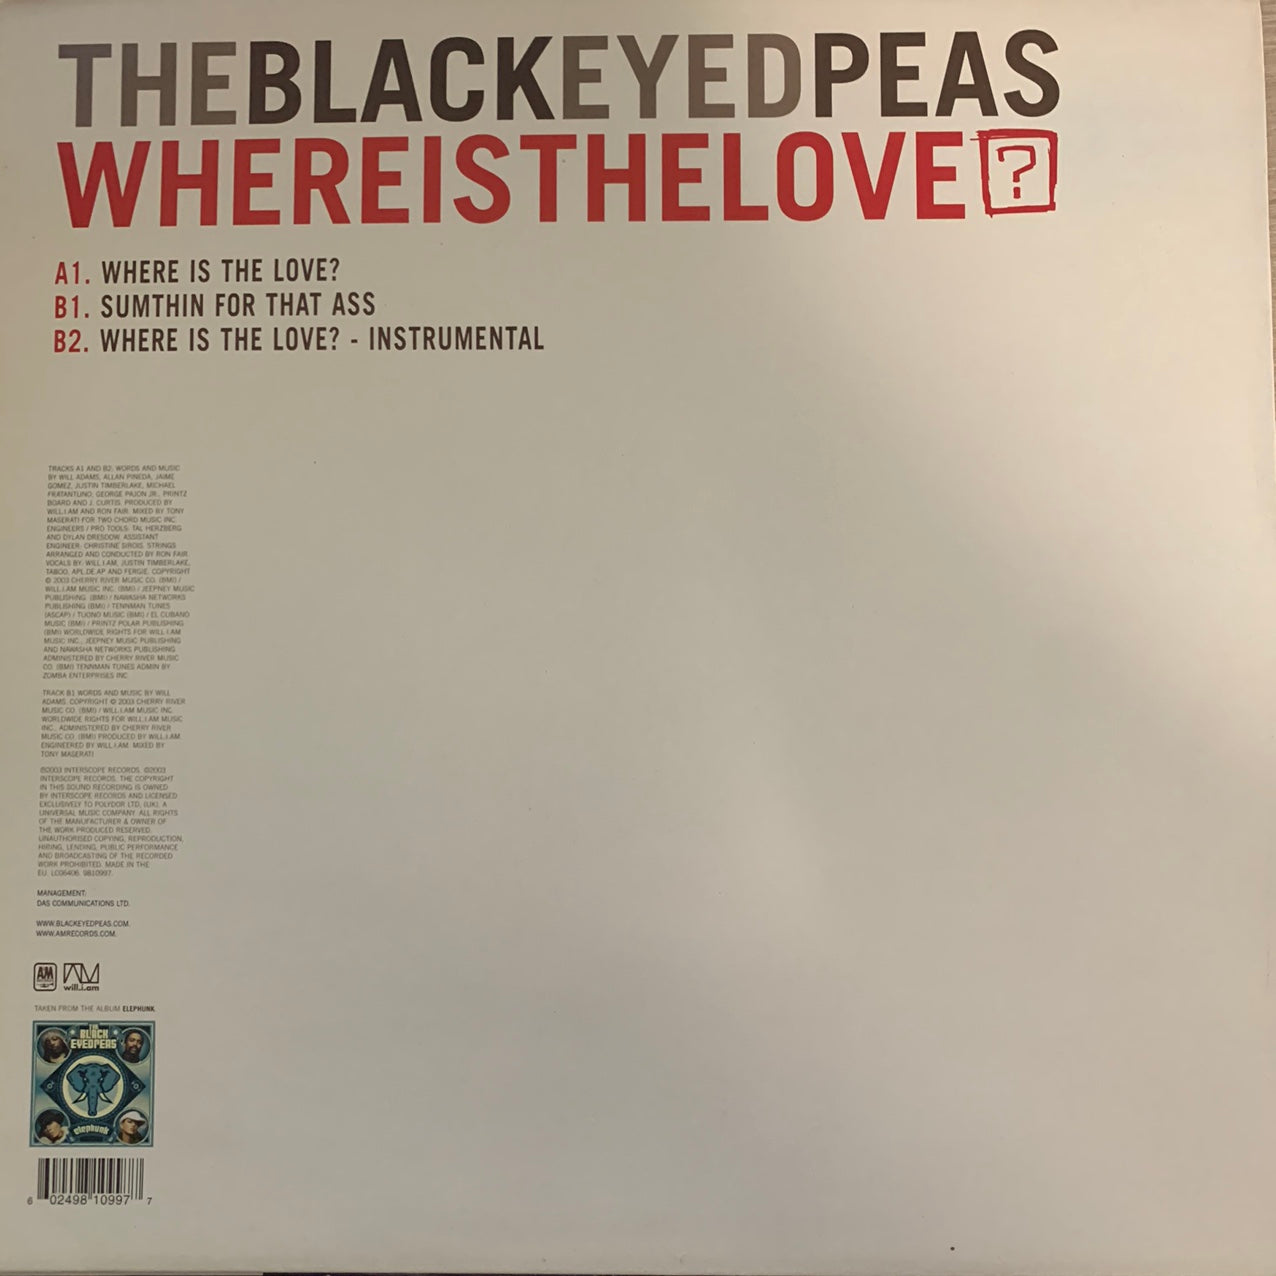 Black Eyed Peas “Where Is The Love” 3 Track 12inch Vinyl